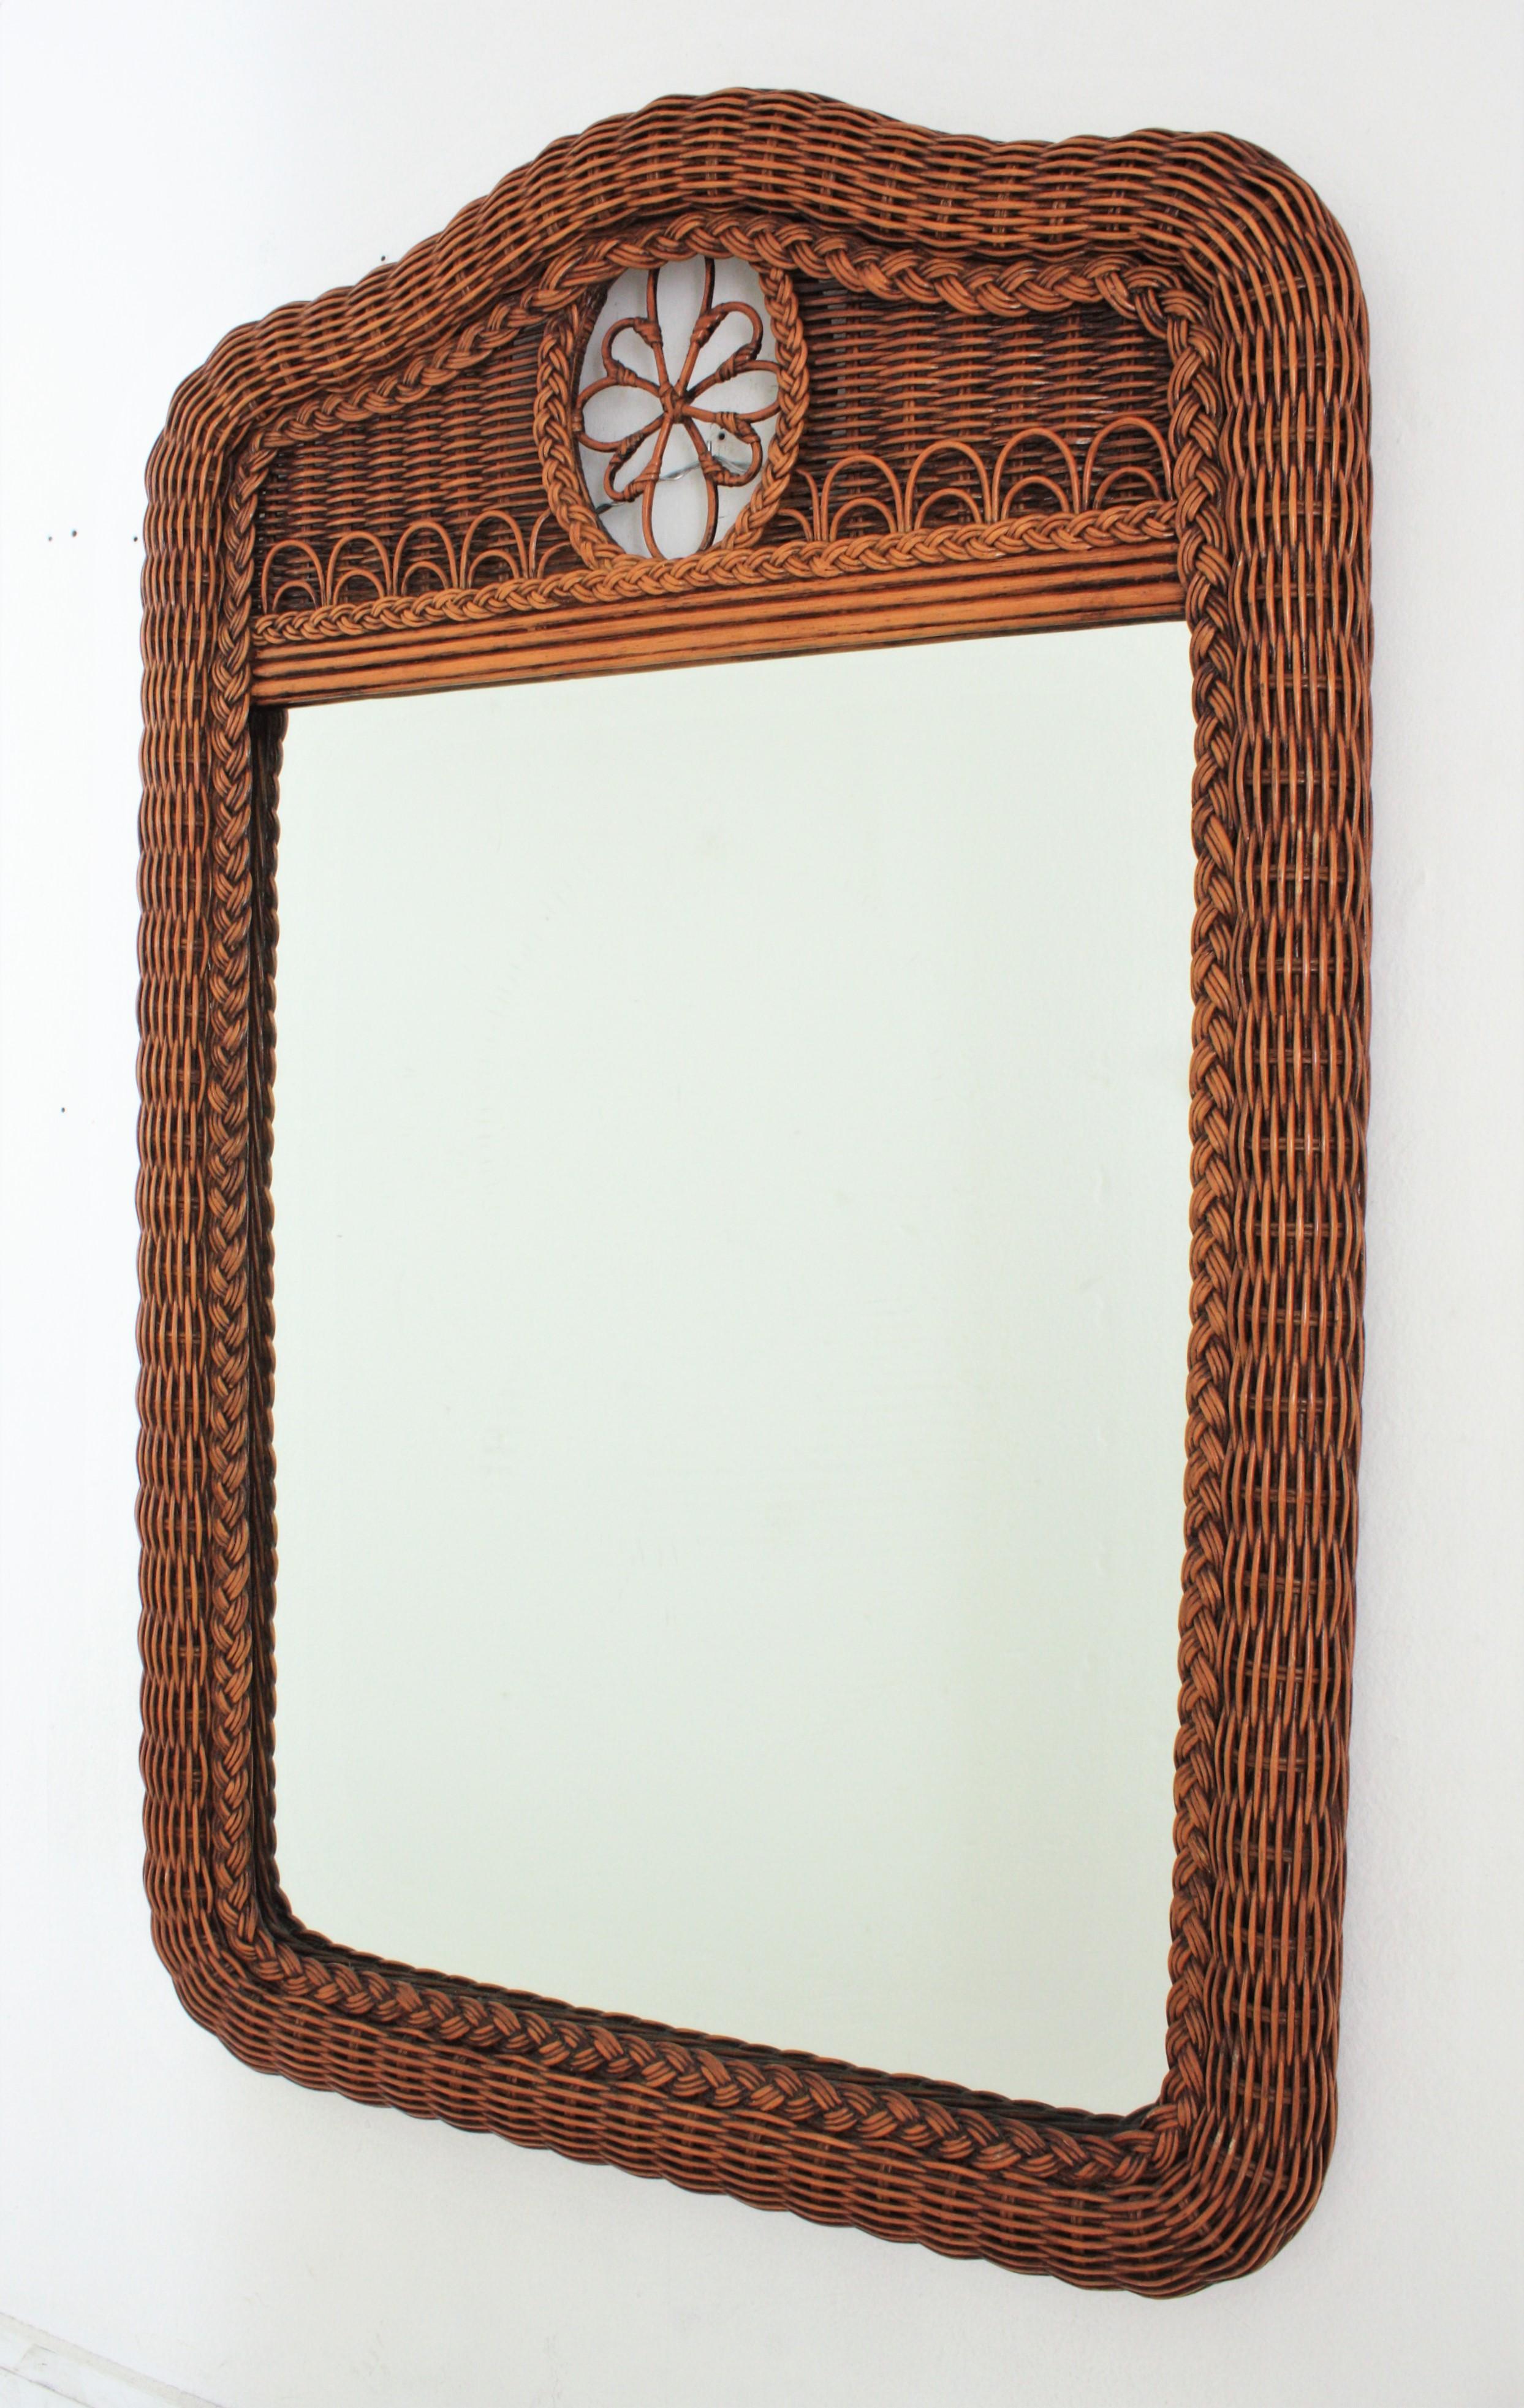 Hand-Crafted Large Woven Rattan Mirror  For Sale